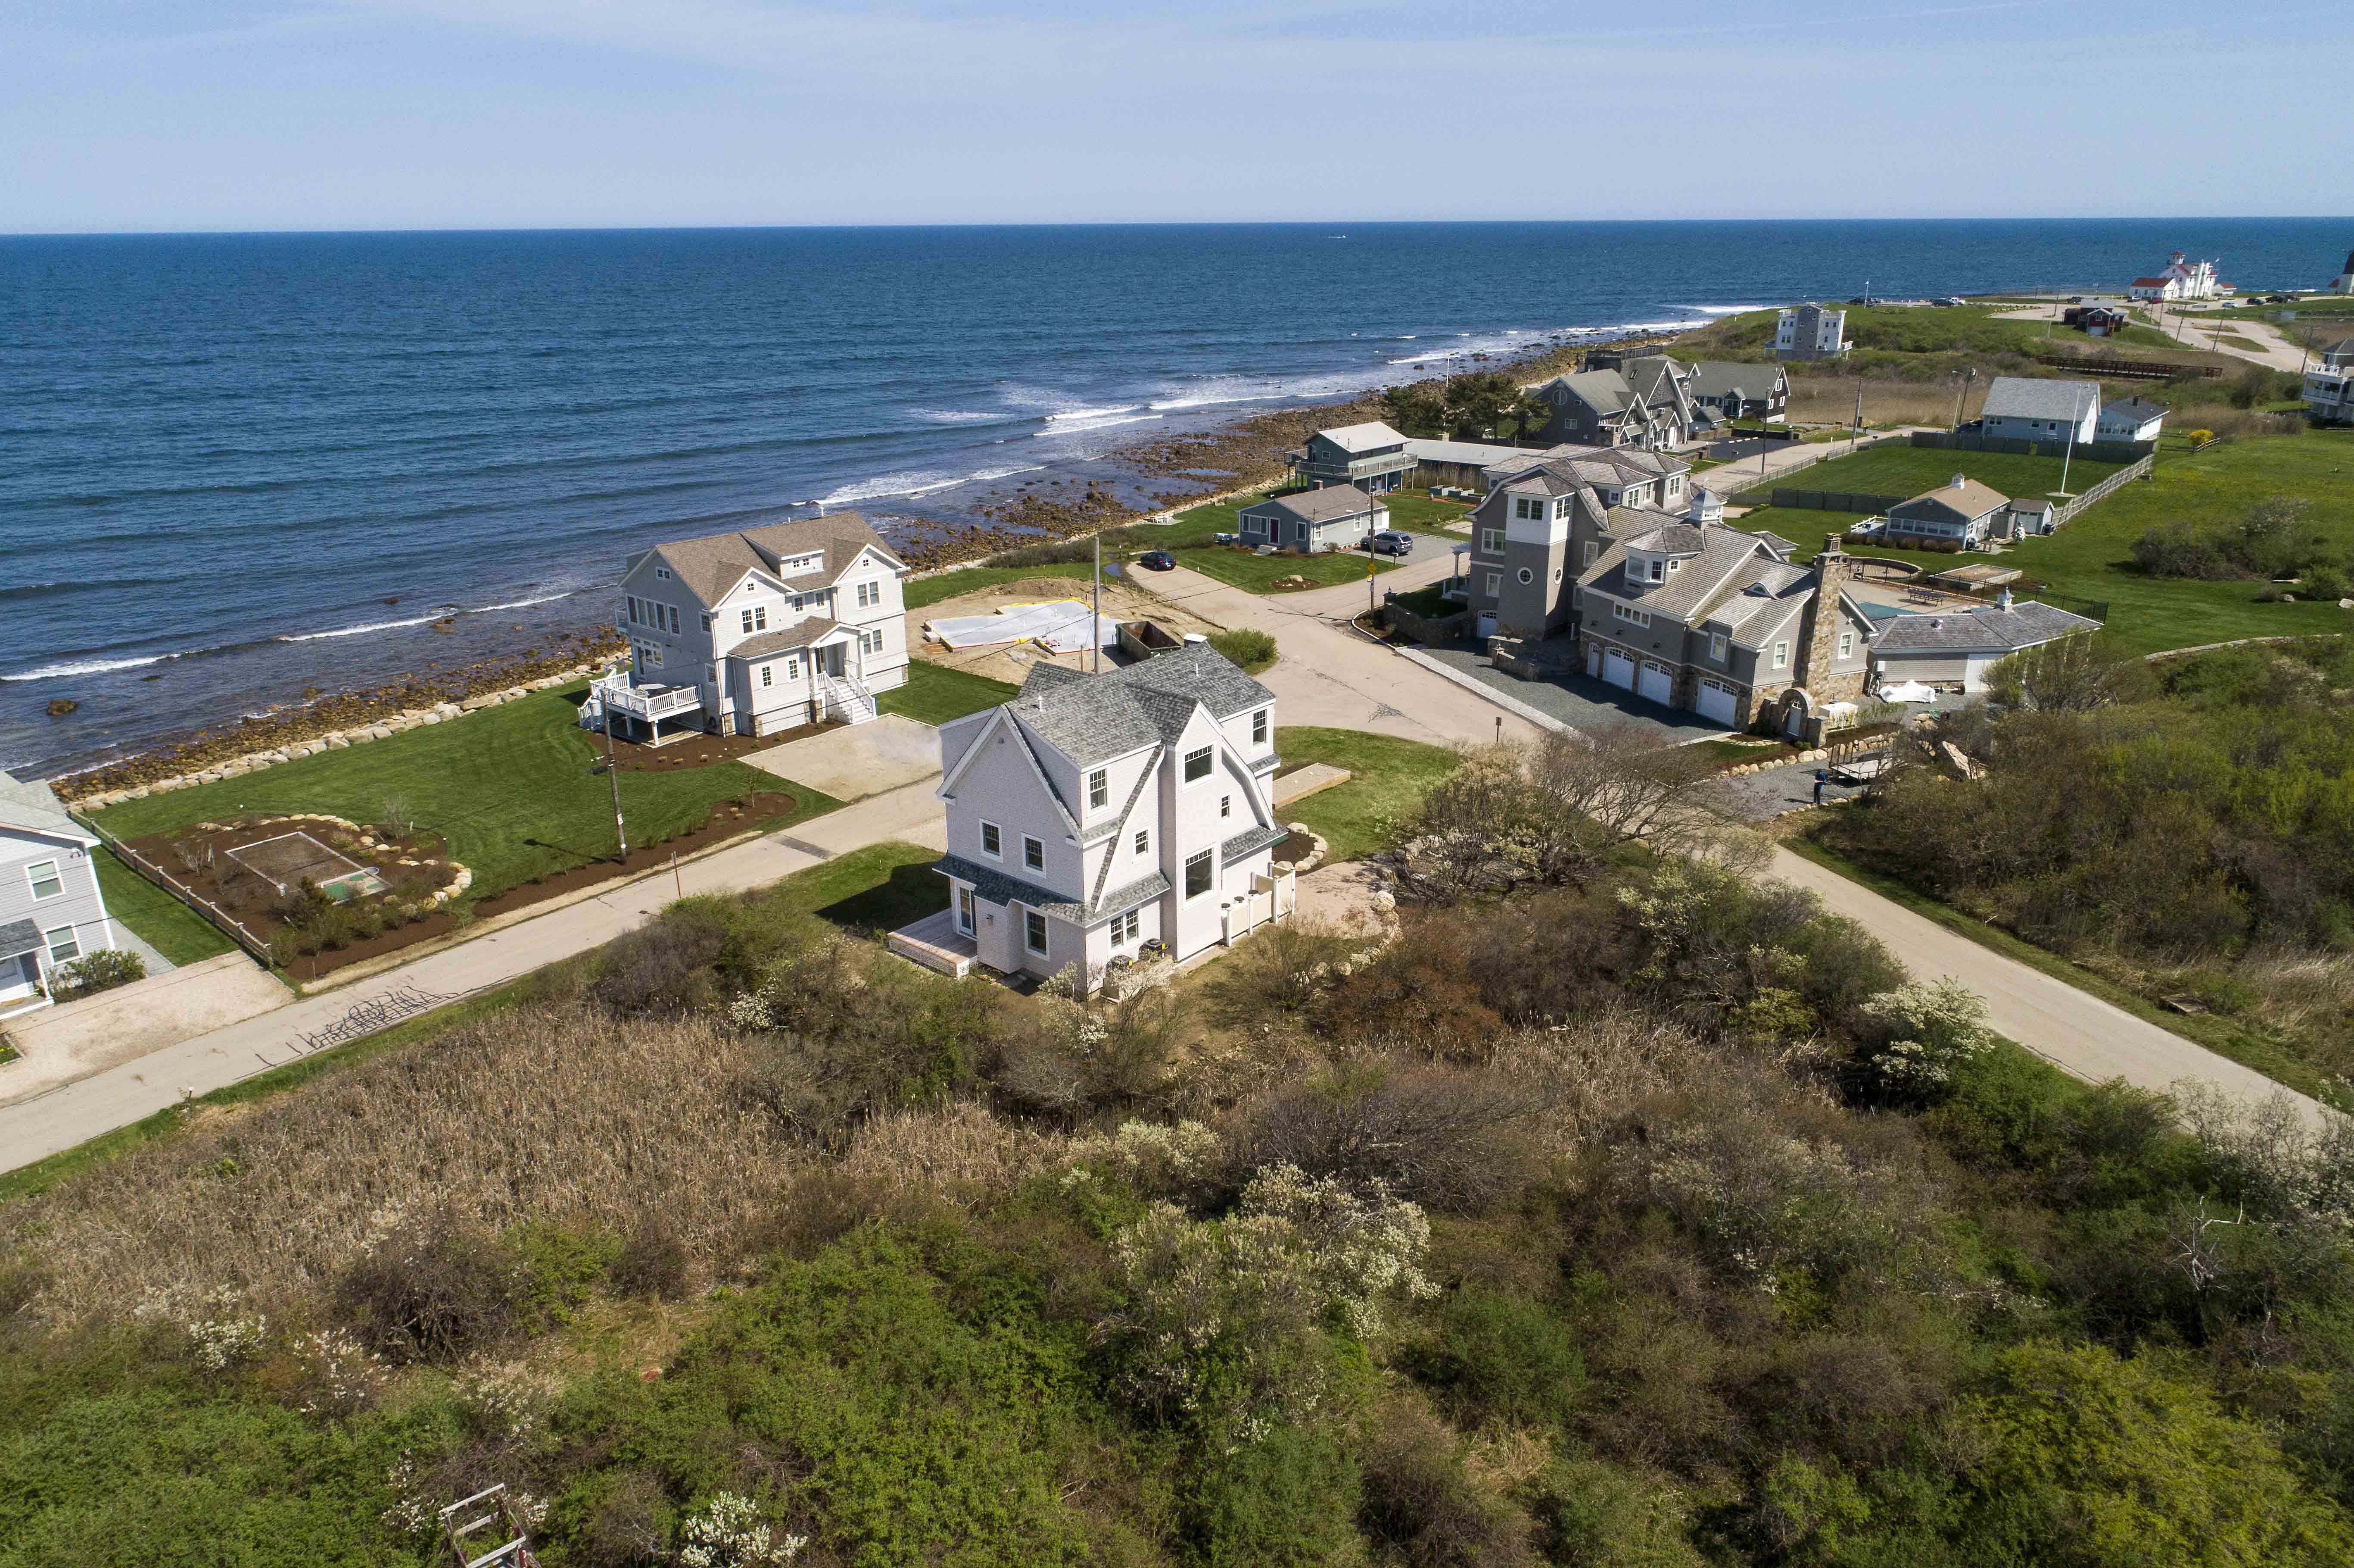 POINT JUDITH NEW CONSTRUCTION SELLS FOR $1.507M, WITH LILA DELMAN REAL ESTATE ON BOTH SIDES OF THE TRANSACTION